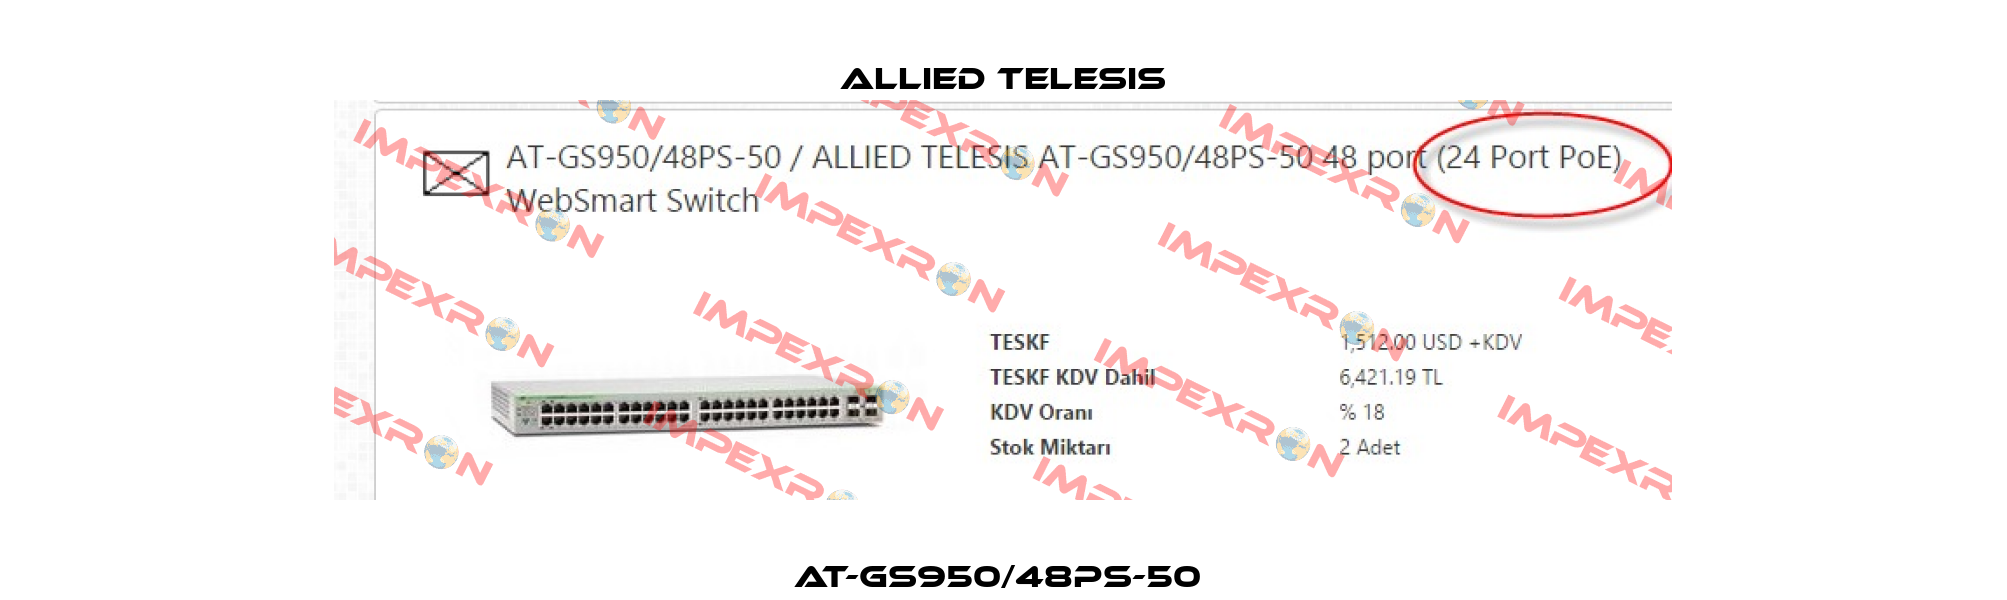 AT-GS950/48PS-50  Allied Telesis